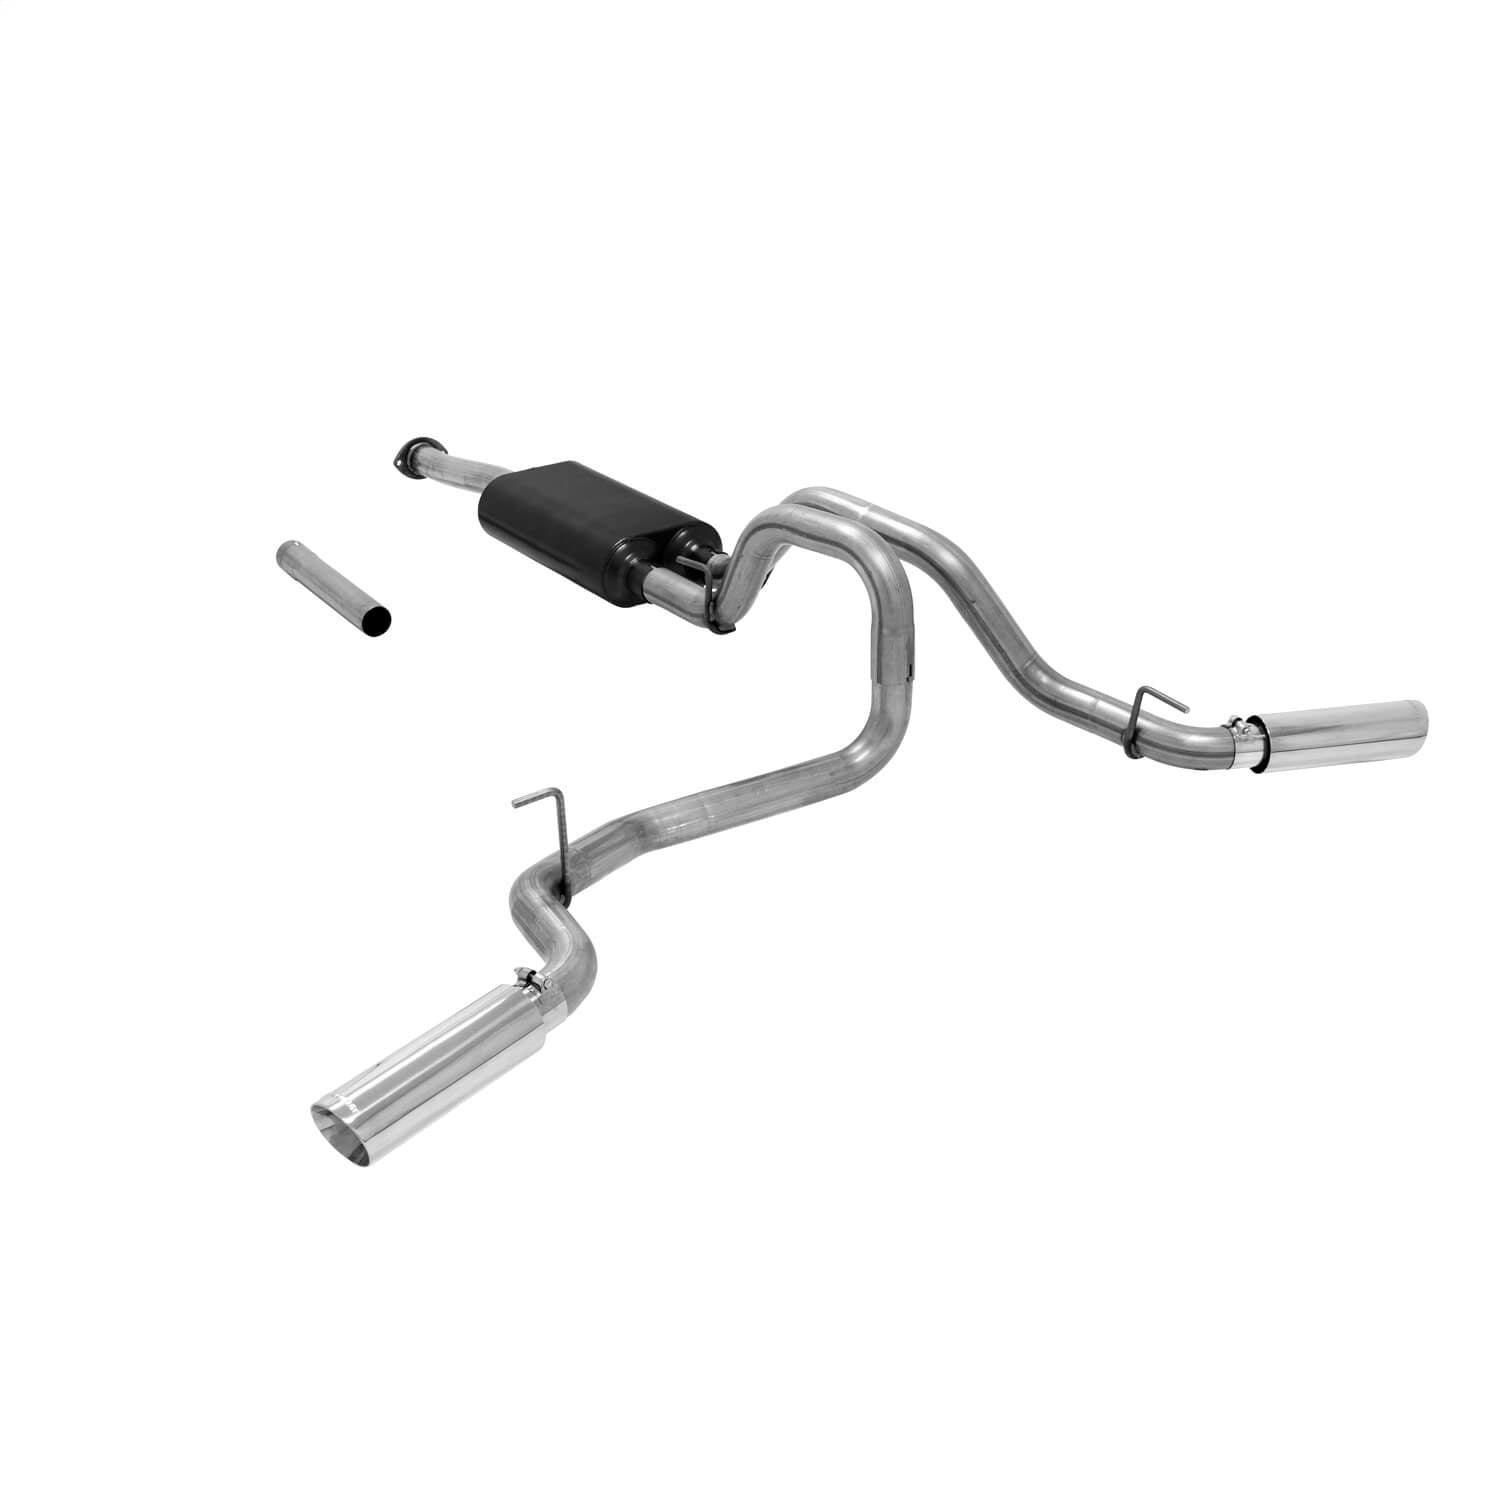 Flowmaster 817719 American Thunder Cat Back Exhaust System Fits 16-21 Tacoma